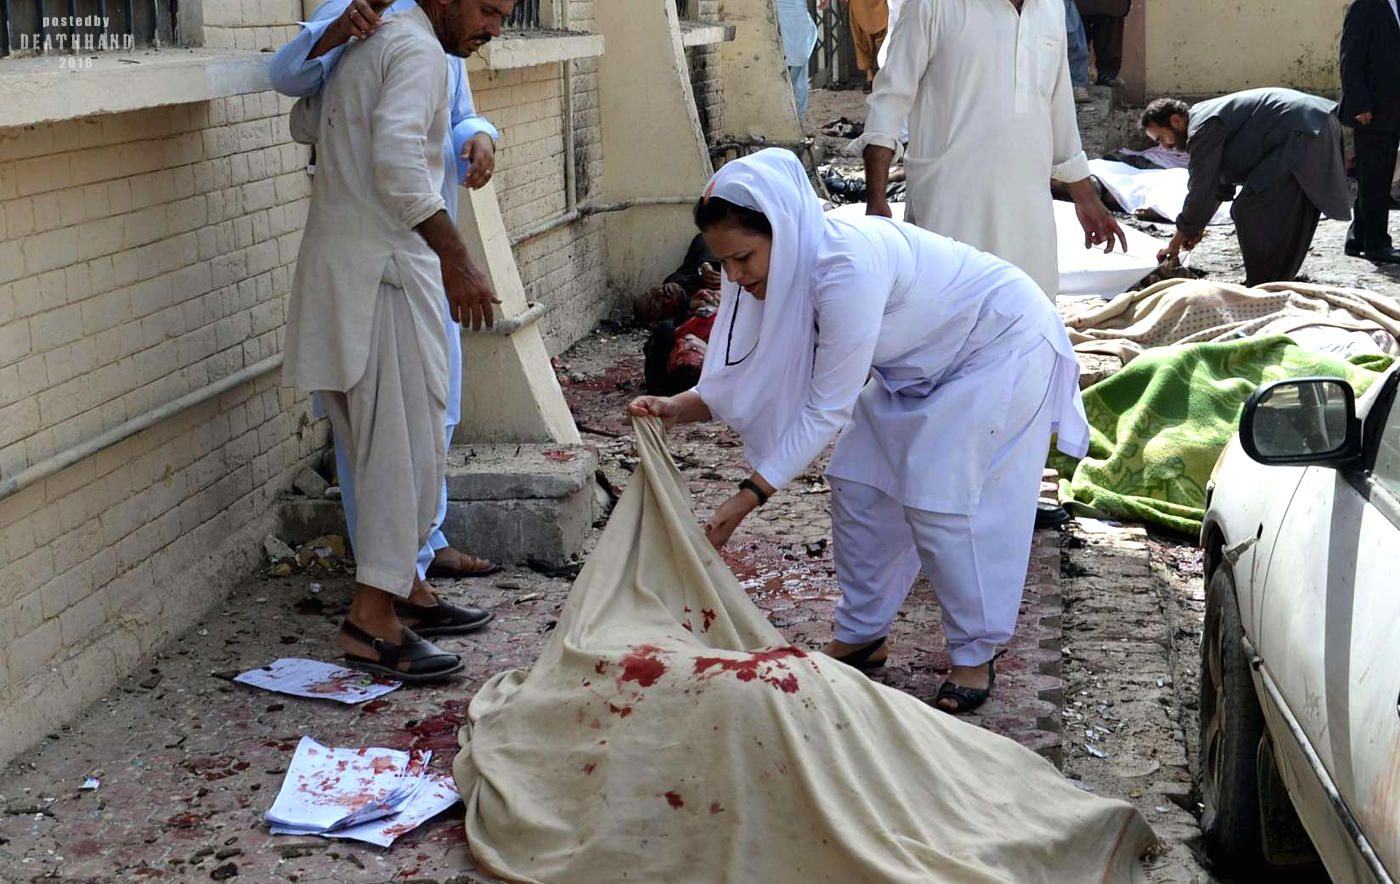 lawyer-killed-mourners-at-hospital-hit-by-suicide-bomber-14-Quetta-PK-aug-8-16.jpg